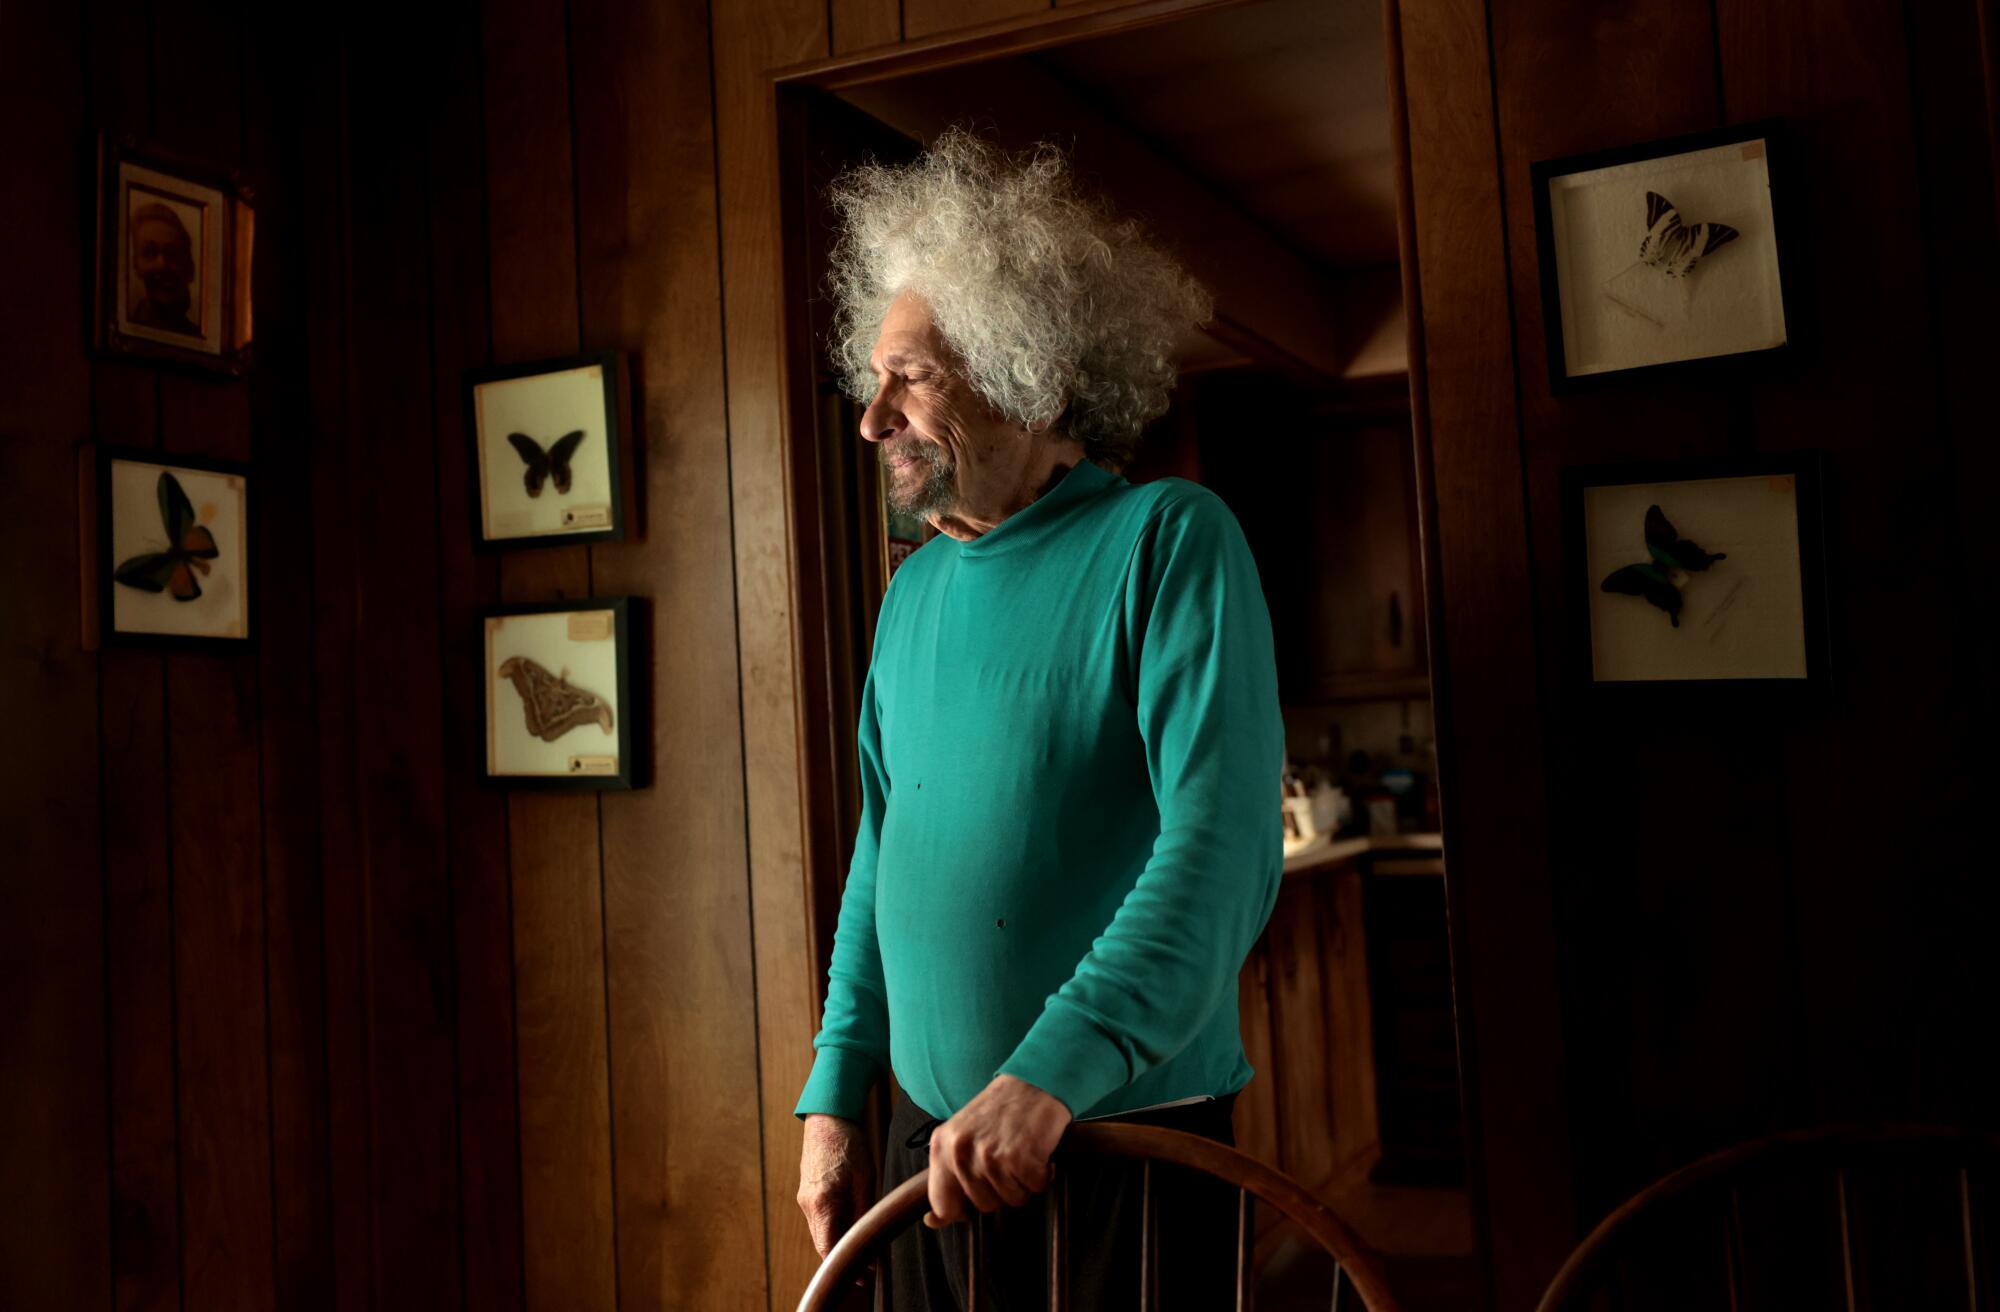 A man with bushy gray hair, in a turquoise-colored shirt, stands in a wood-paneled room with framed butterflies on the wall 